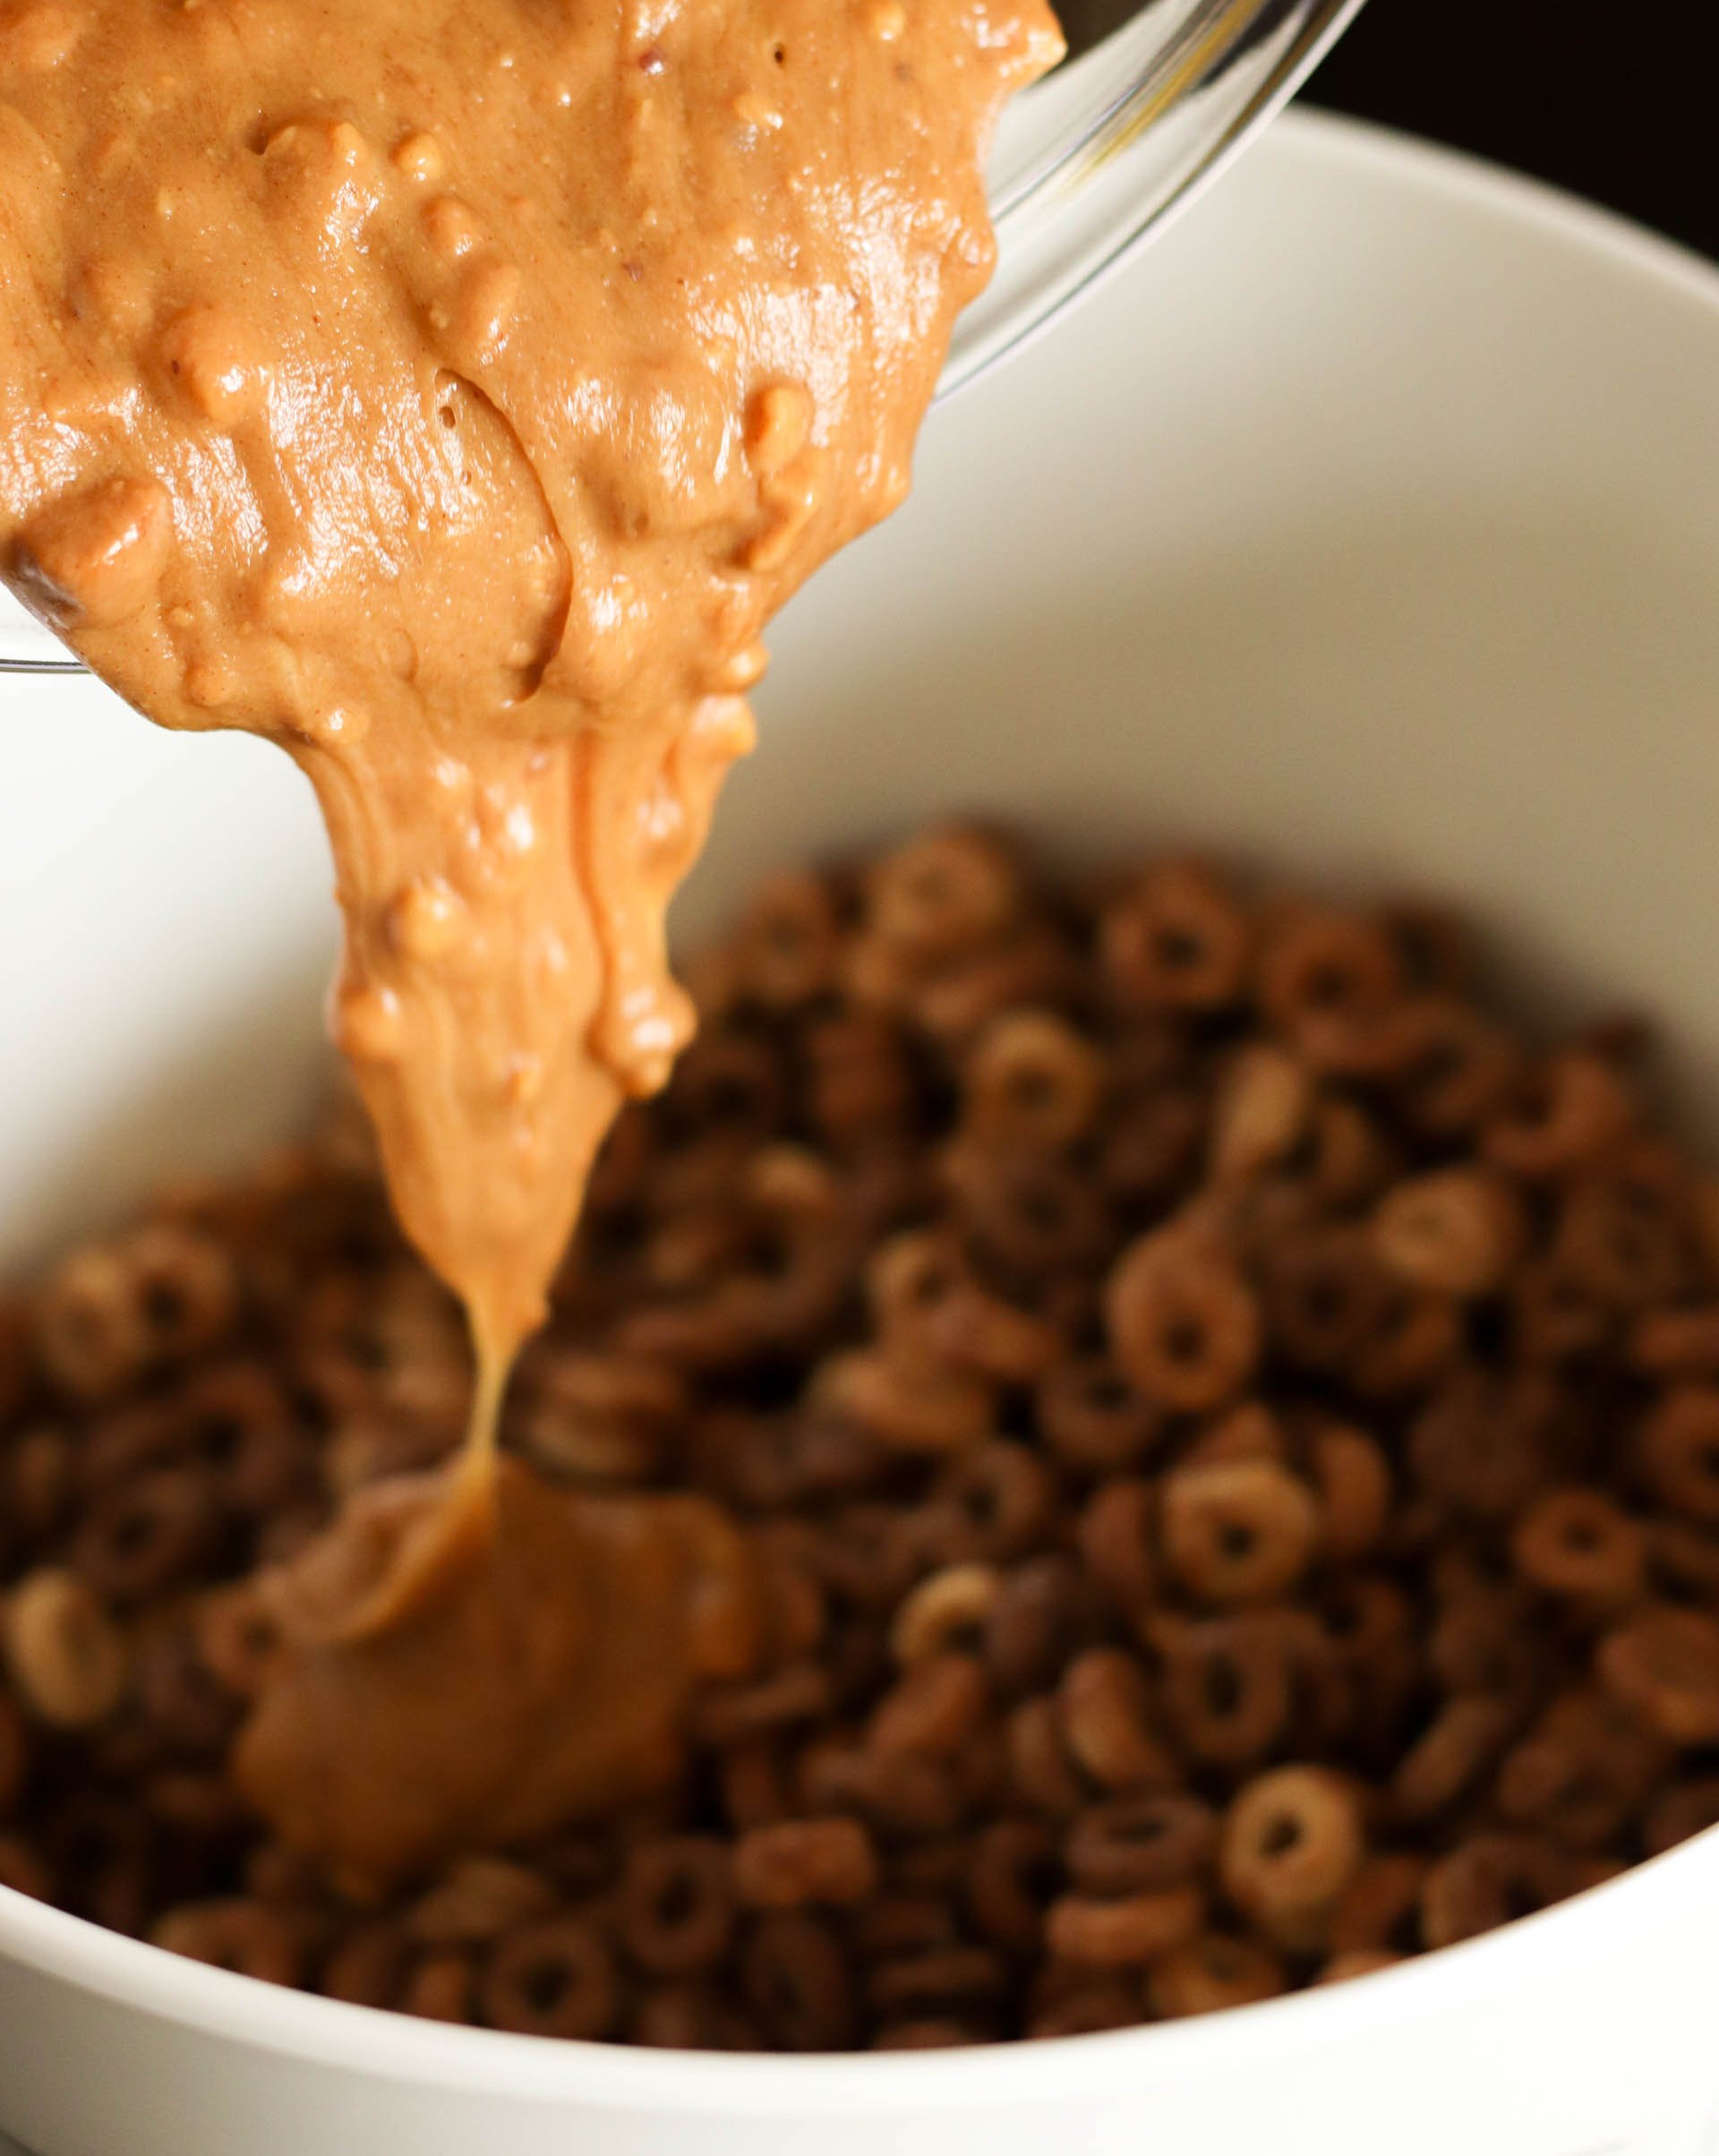 Adding peanut butter to cereal in a mixing bowl